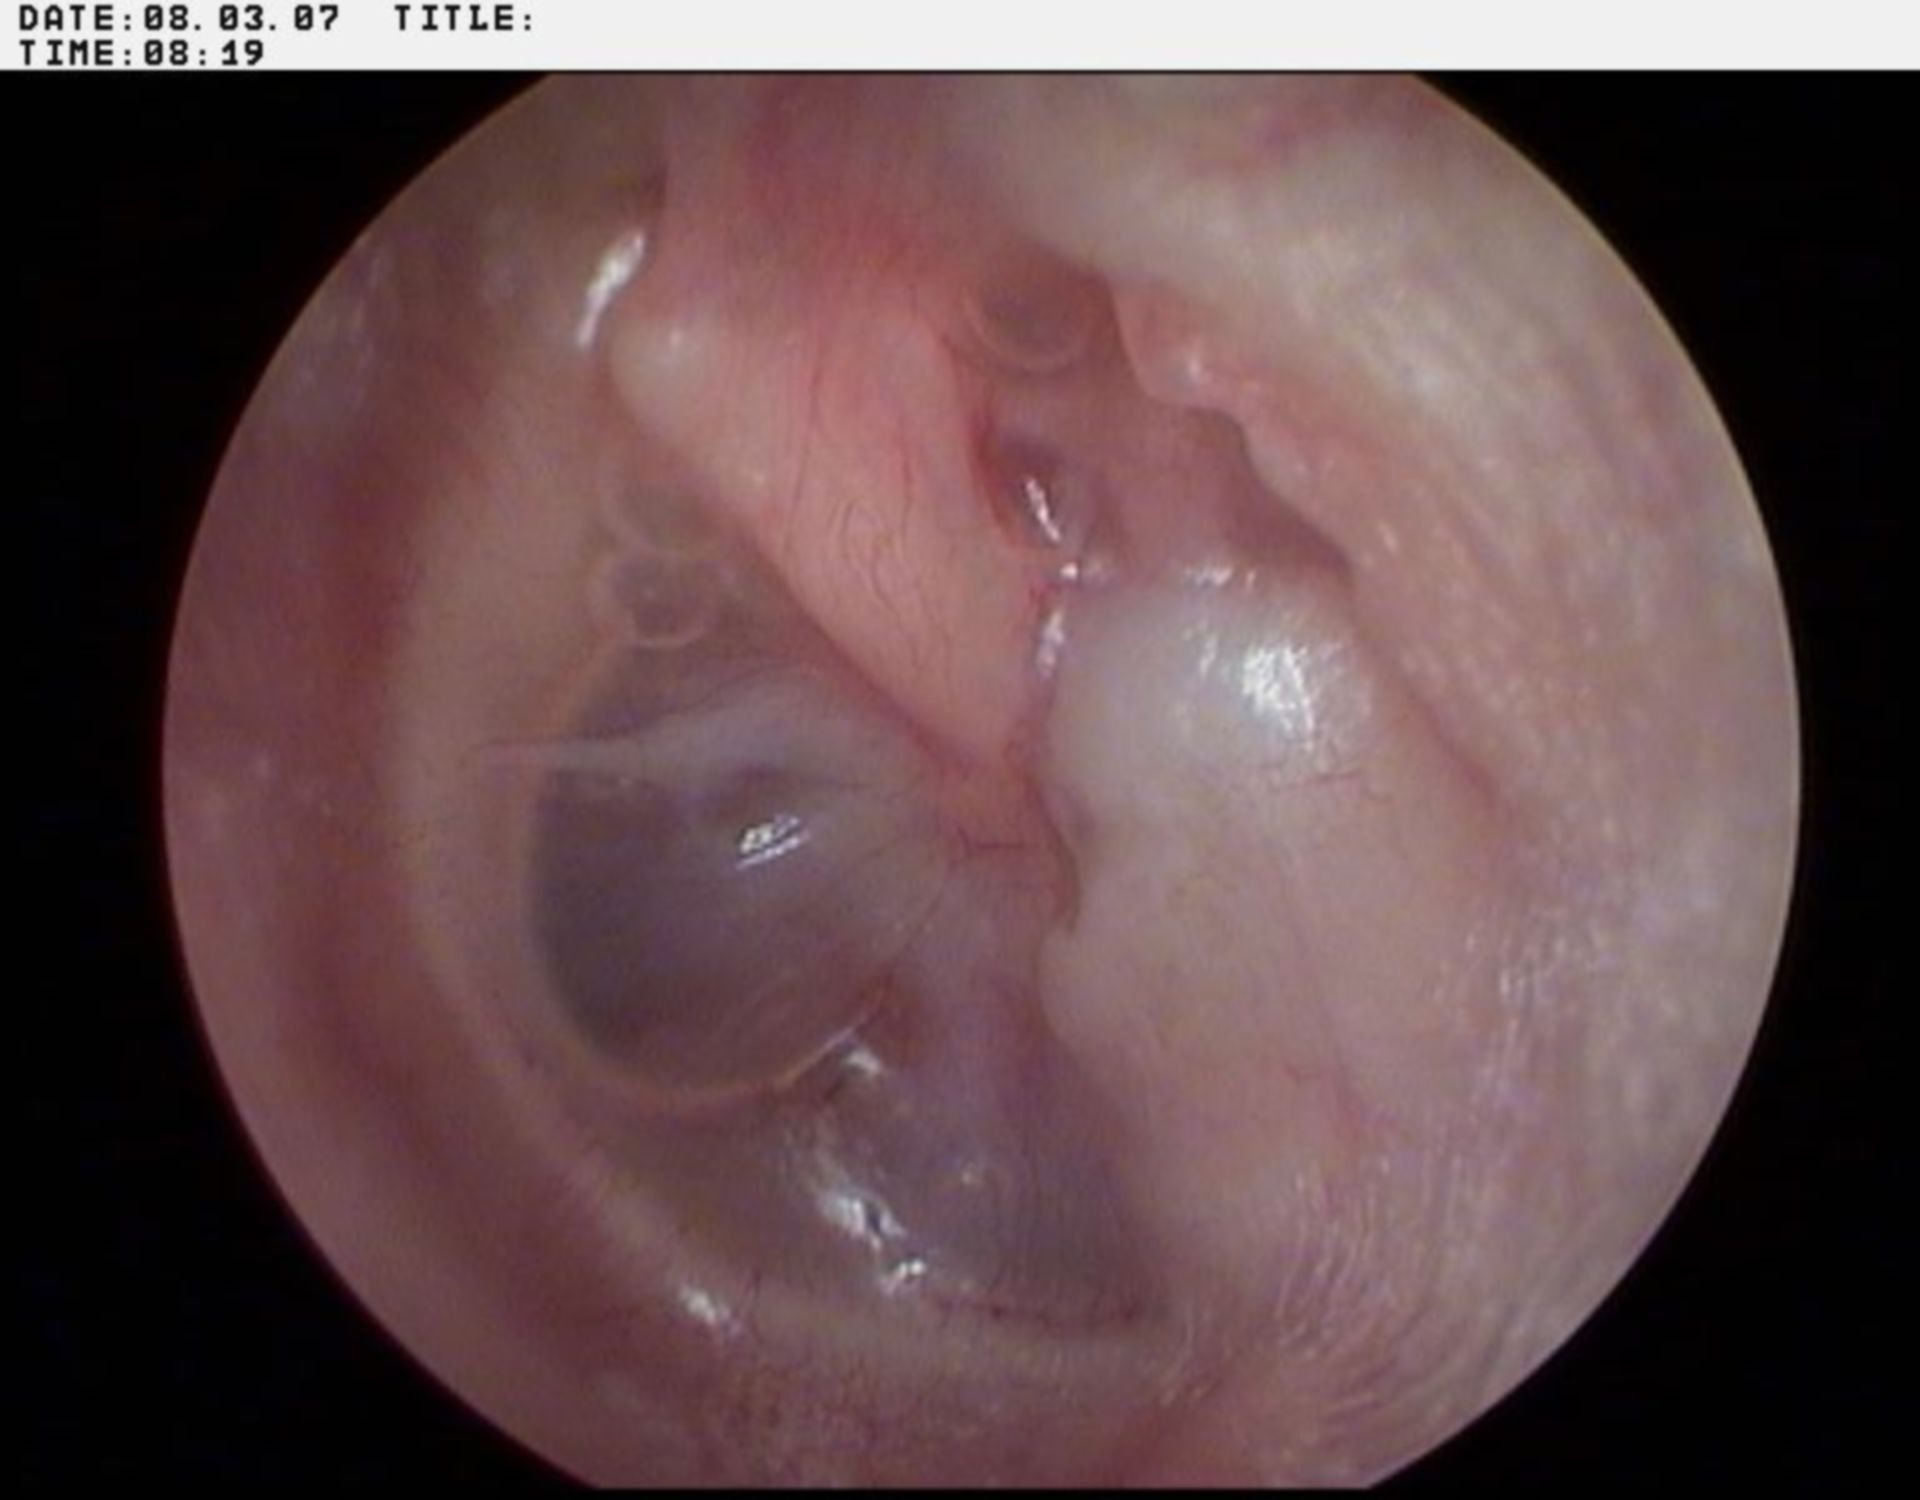 Massively retracted tympanic membrane with middle ear effusion on the left